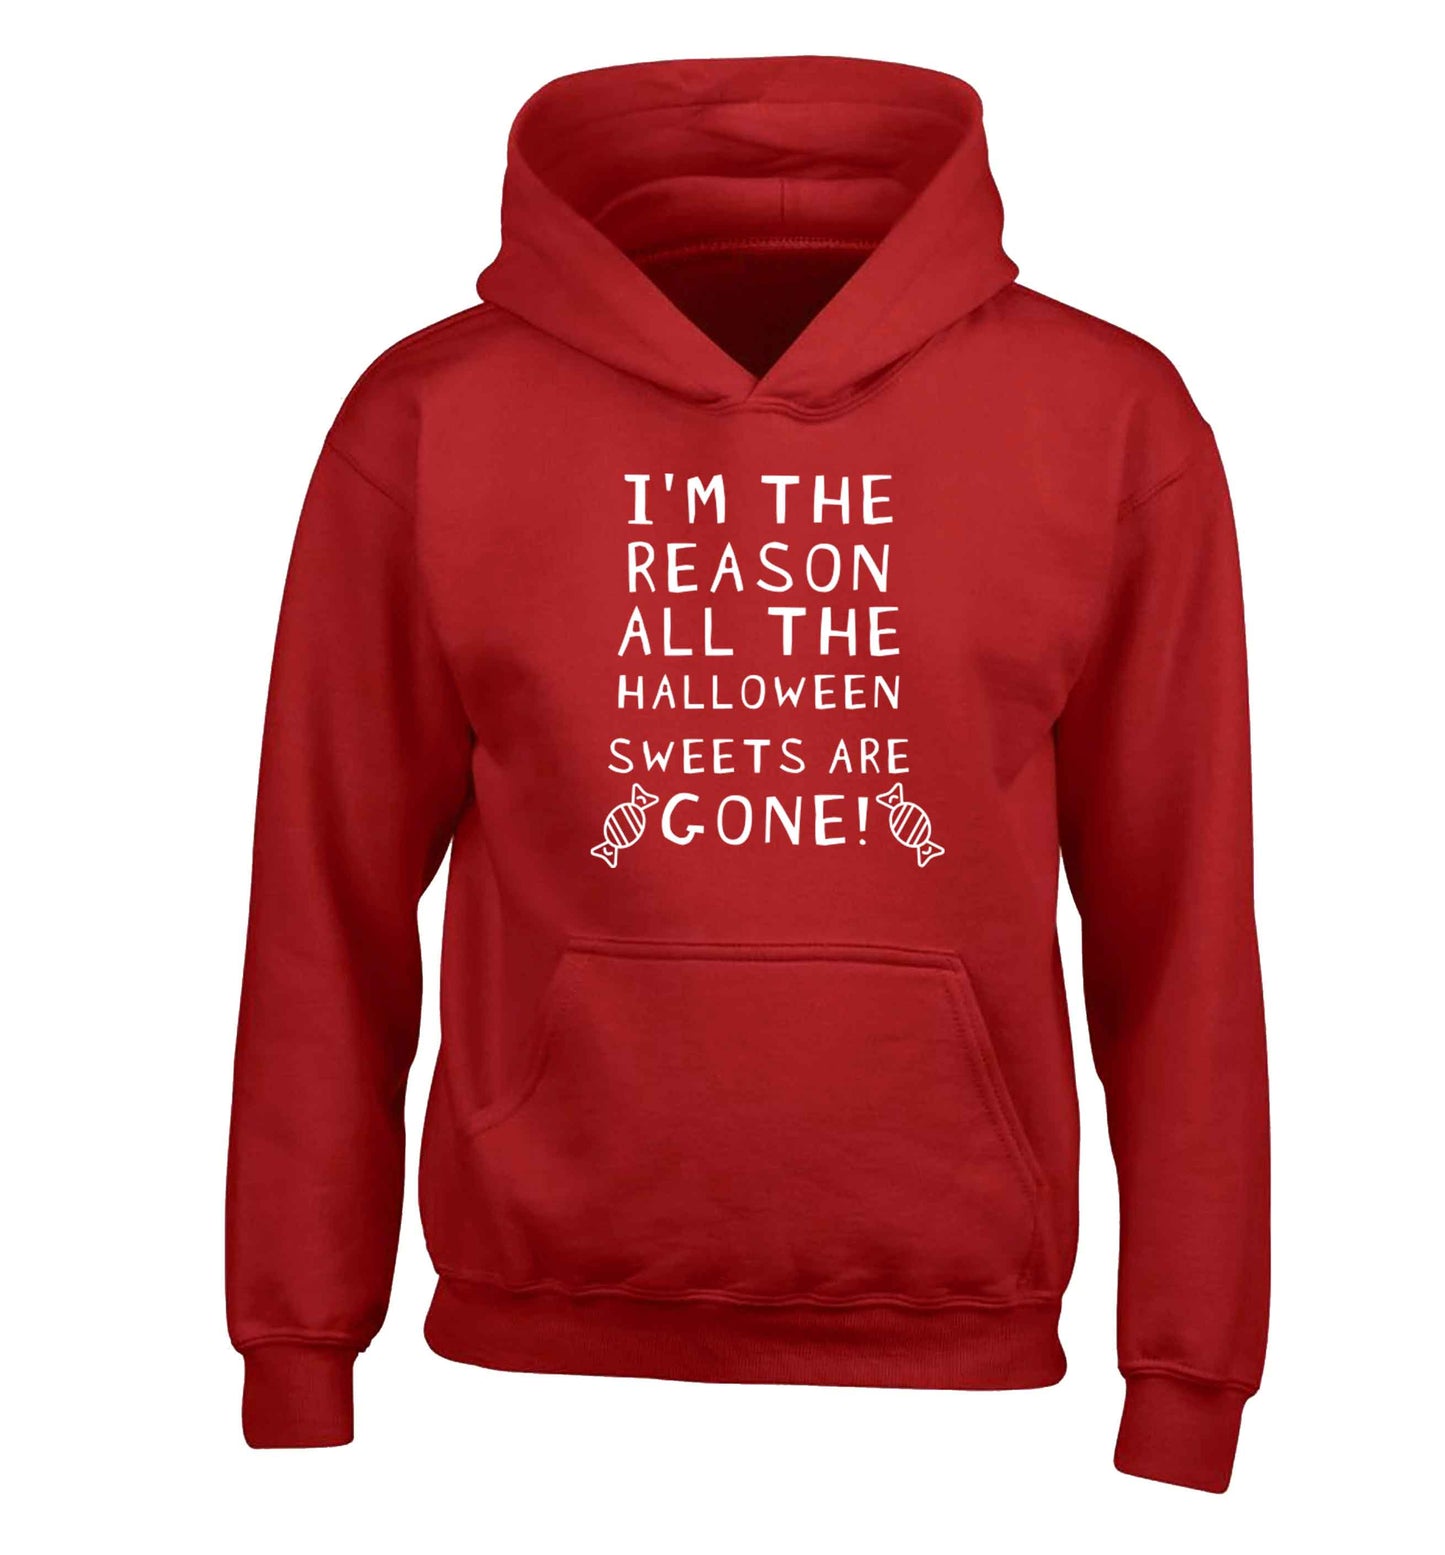 I'm the reason all of the halloween sweets are gone children's red hoodie 12-13 Years